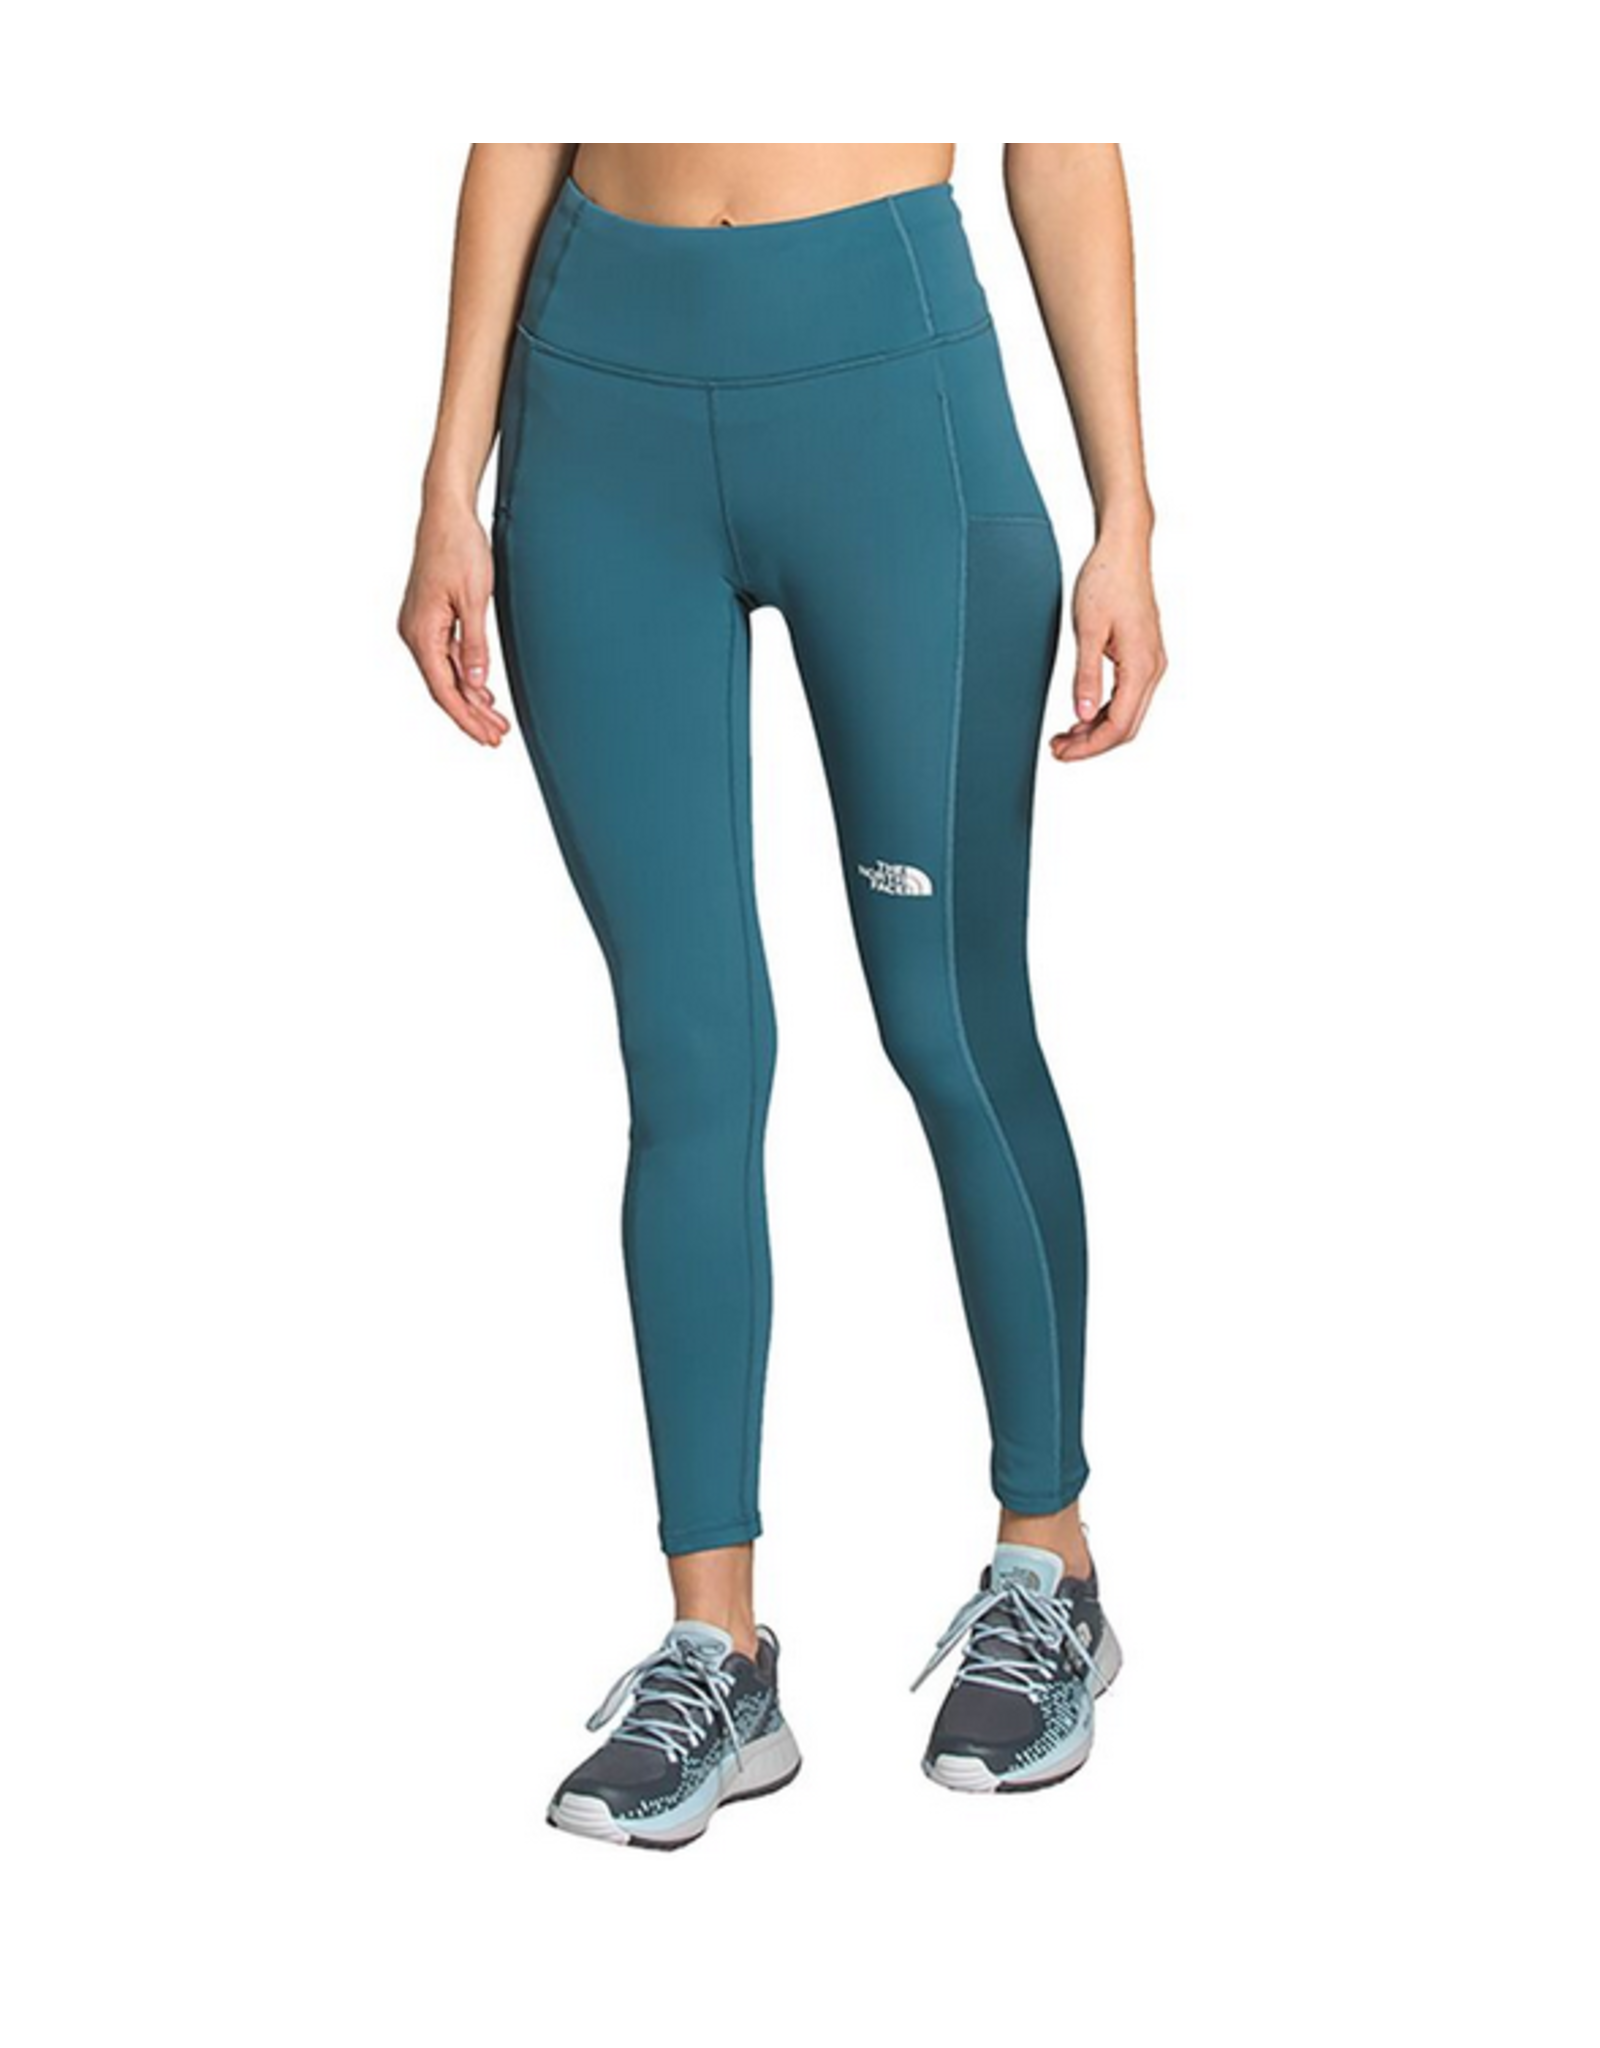 women's winter warm tights by the north face